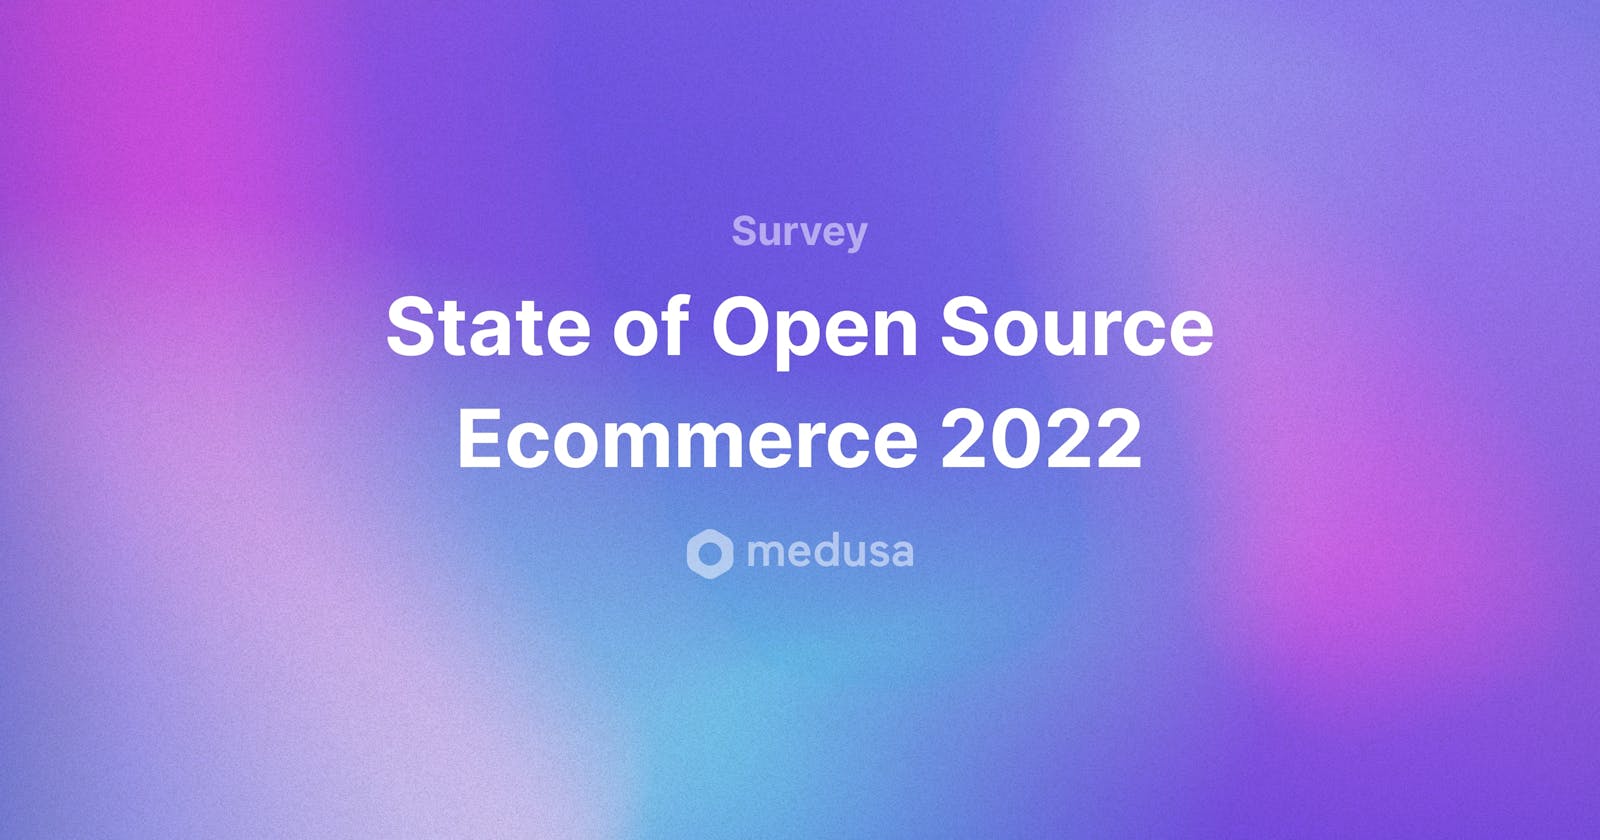 What is your Take on The State of Open Source Ecommerce 2022?